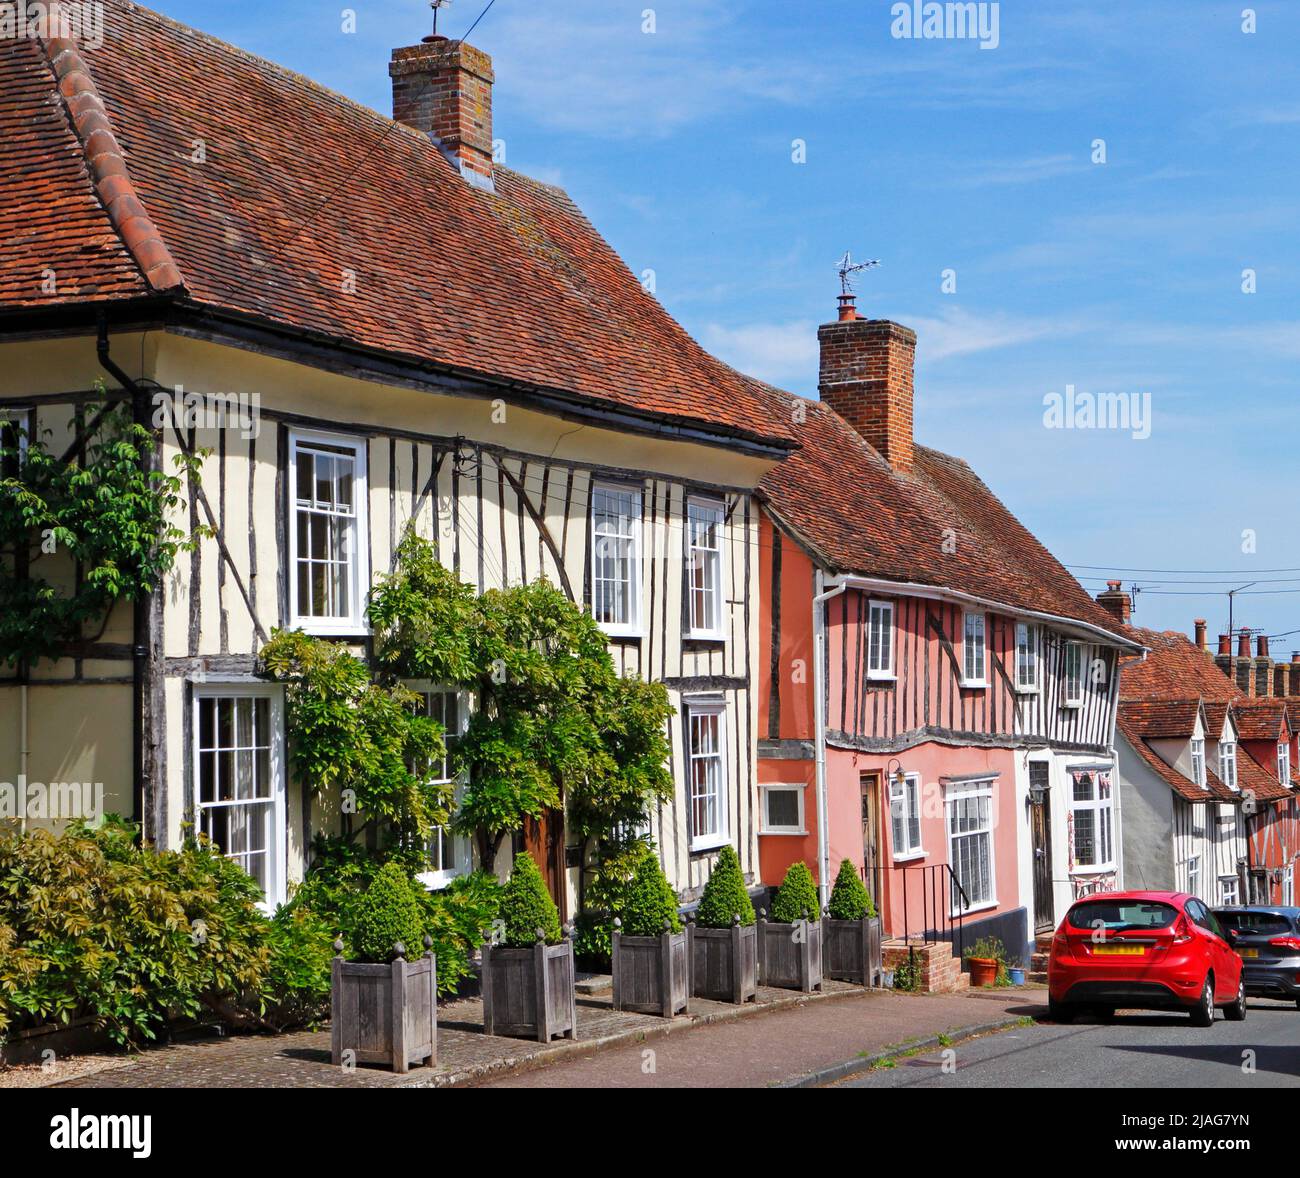 A street of well preserved half-timbered and plaster houses in the former 'wool town' of Lavenham, Suffolk, England, United Kingdom. Stock Photo